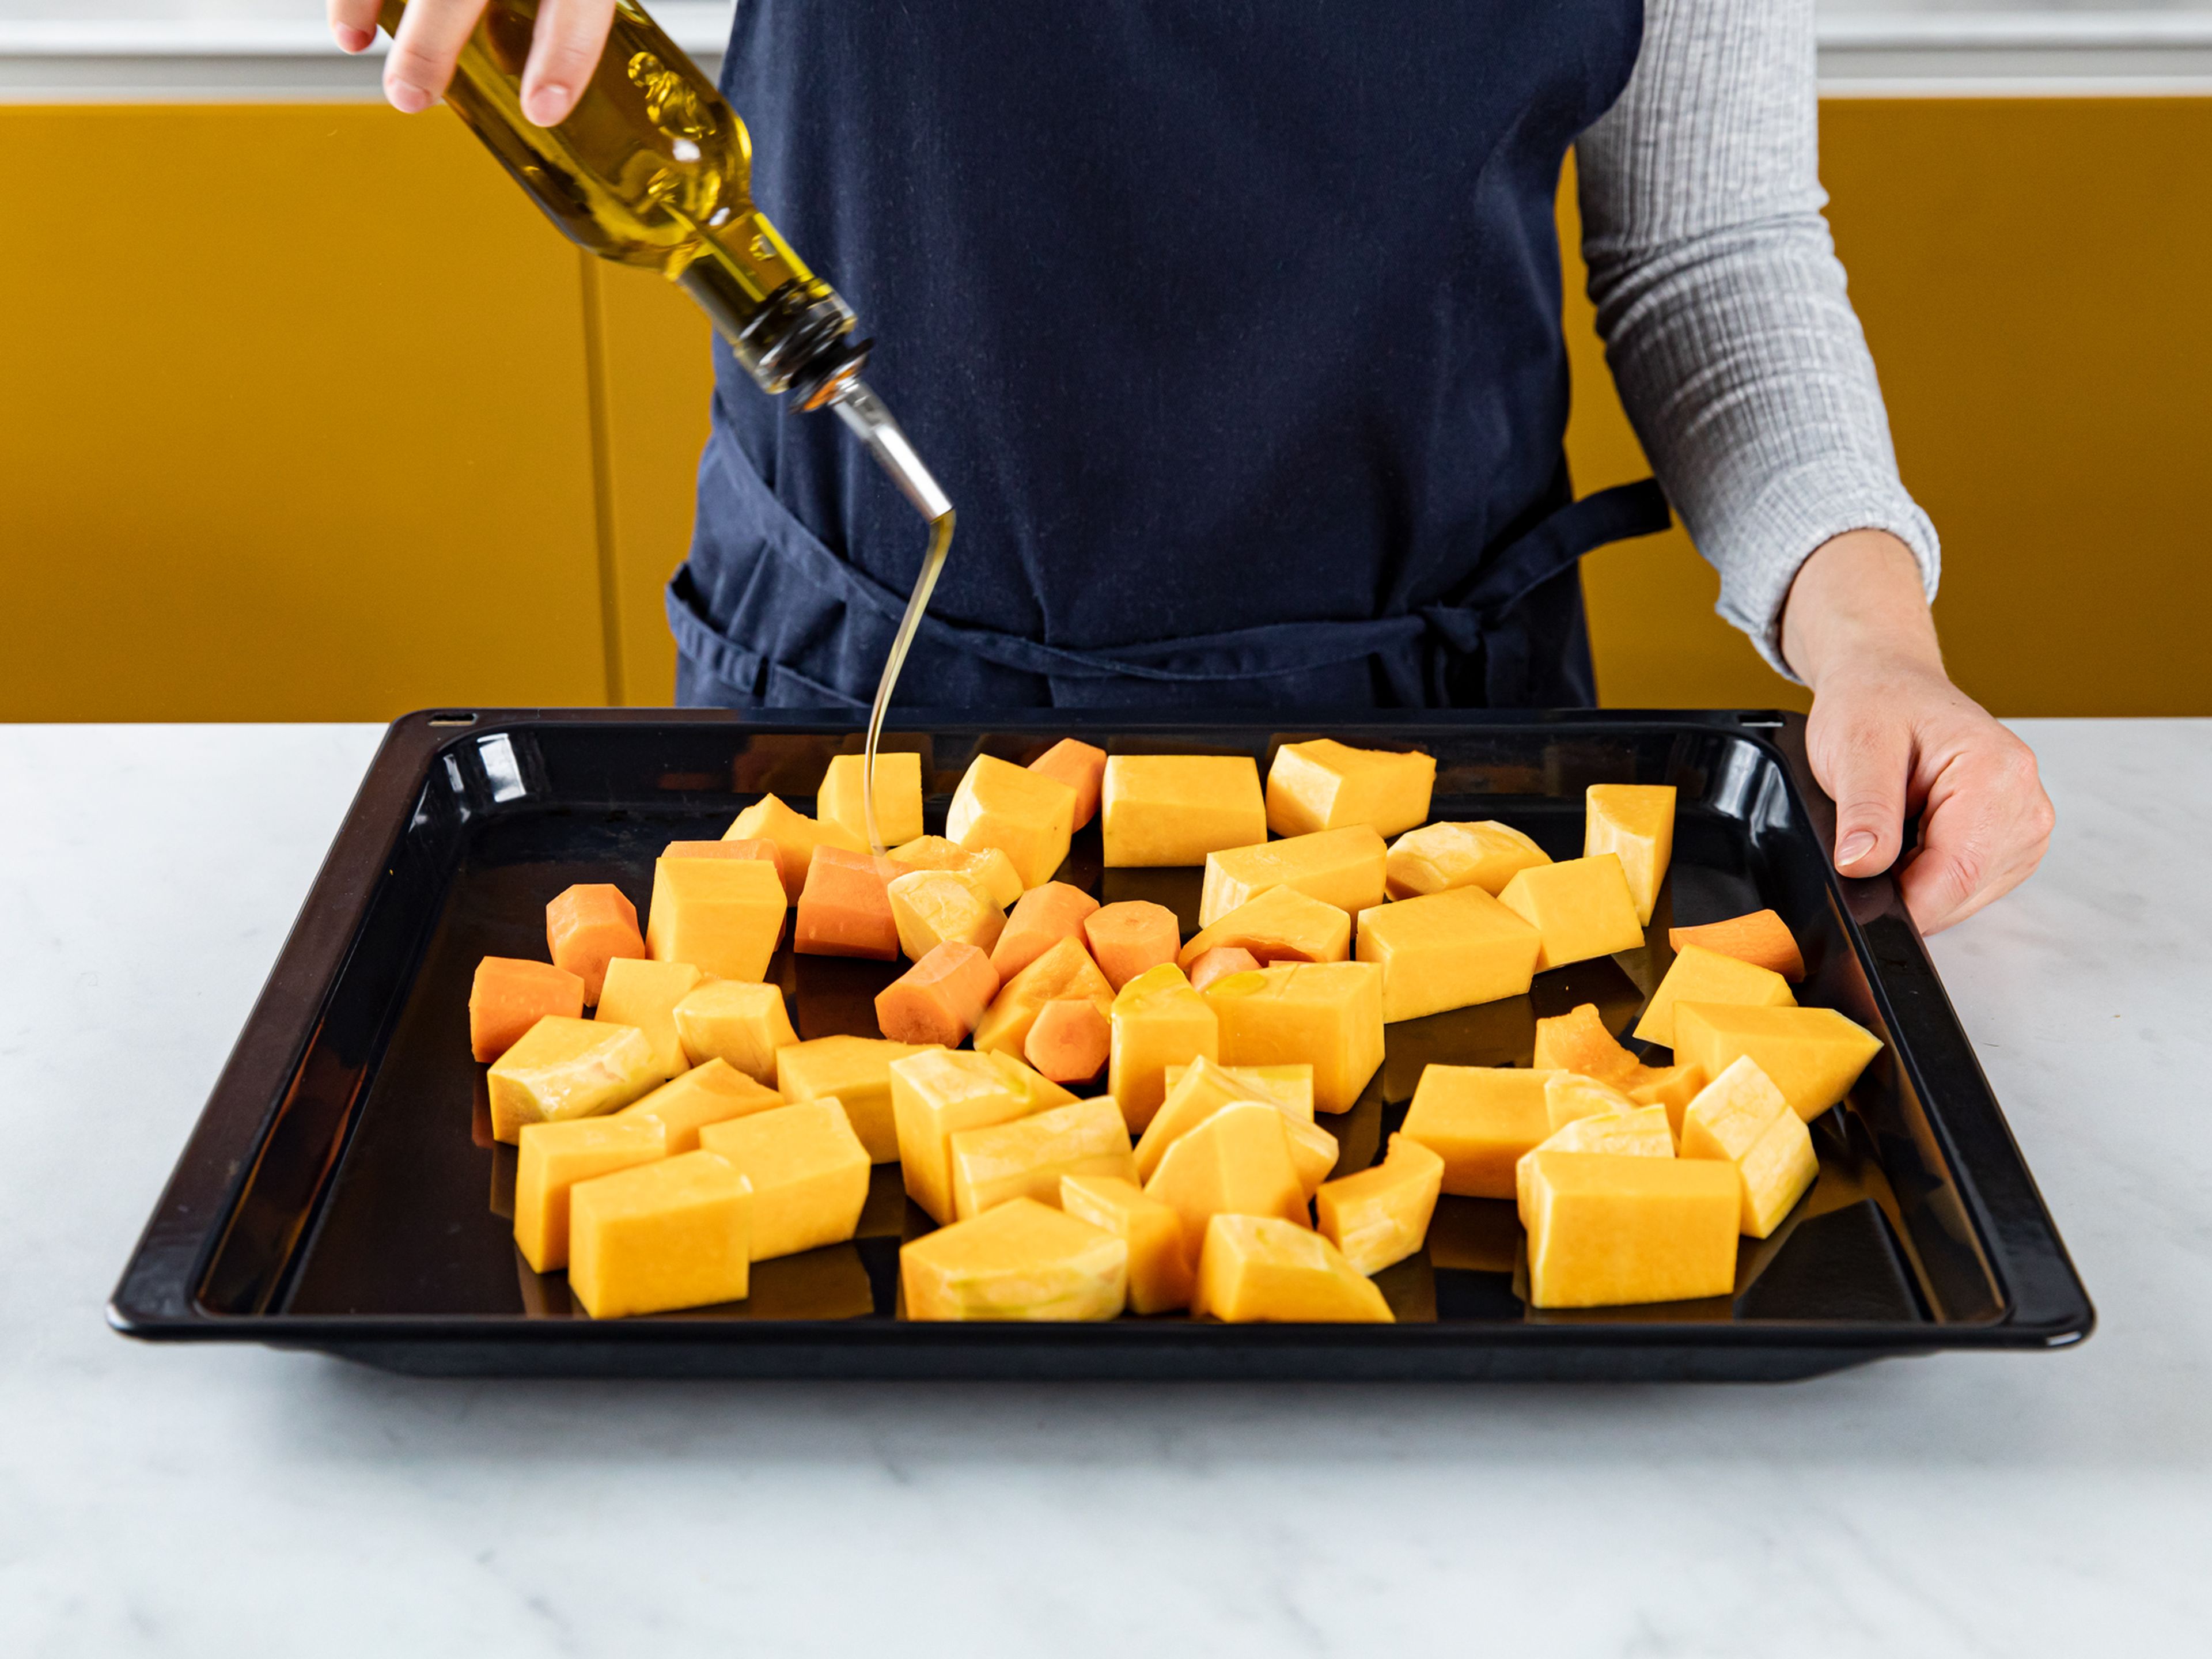 Toss butternut squash and carrot in olive oil, salt, and pepper. Place on a baking sheet and bake for approx. 40 min., turning the pieces occasionally so they brown evenly.